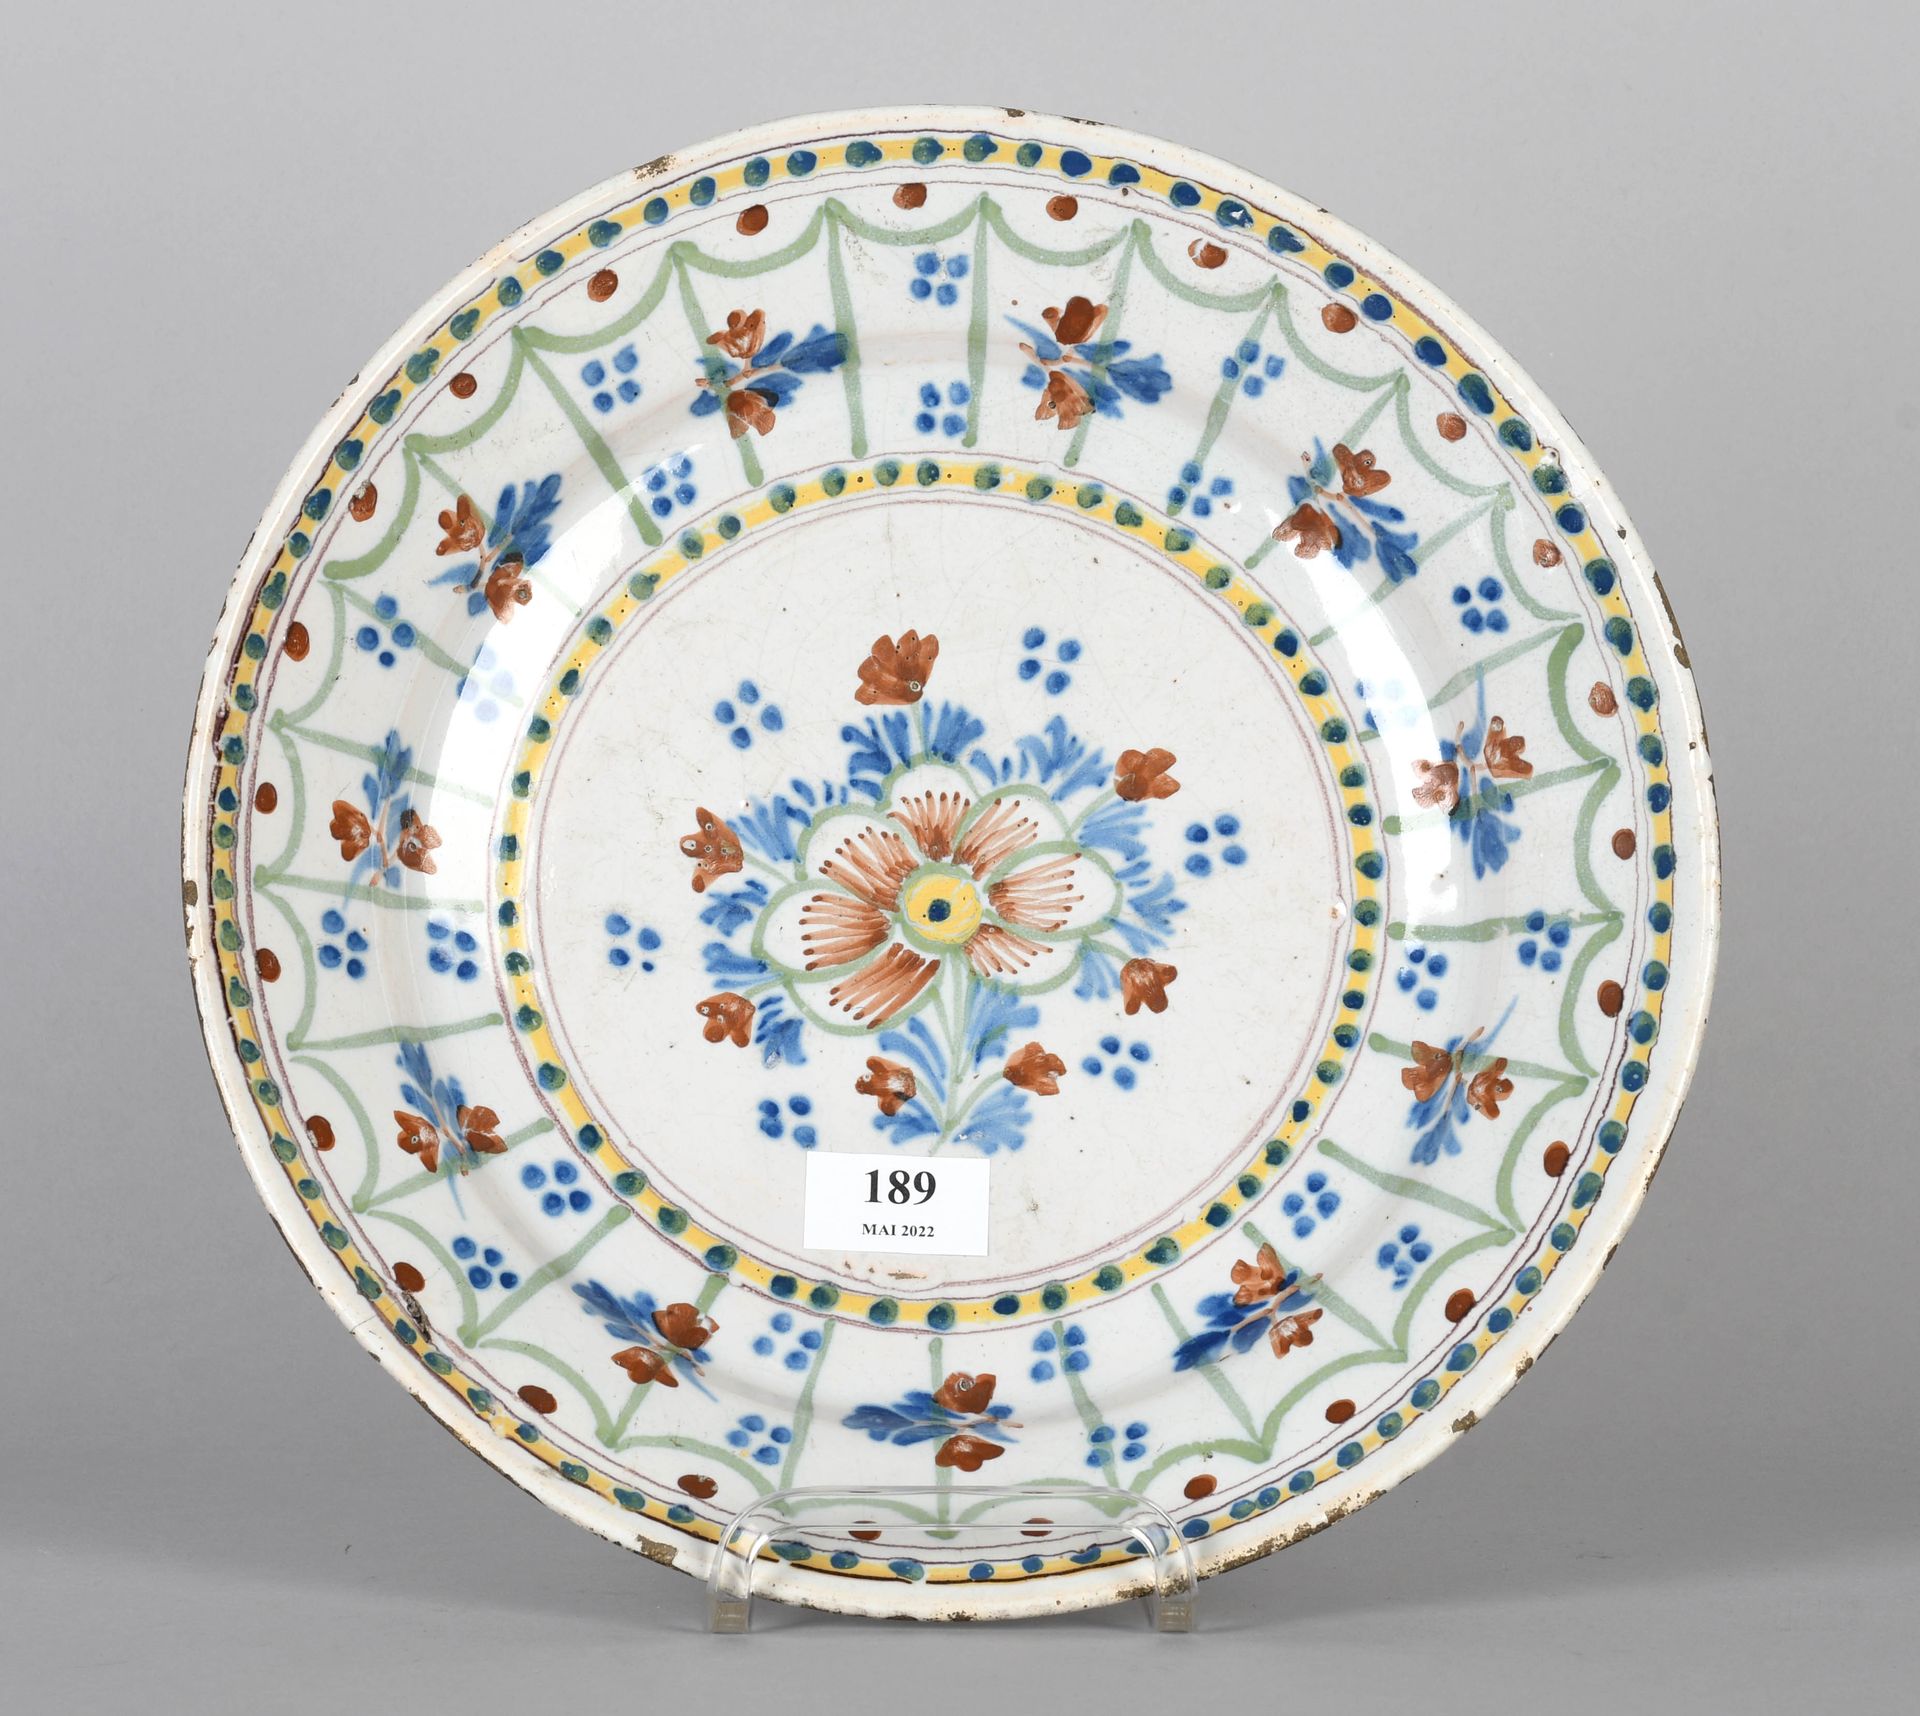 Null Brussels, end of XVIIIth century

Round dish in floral polychrome earthenwa&hellip;